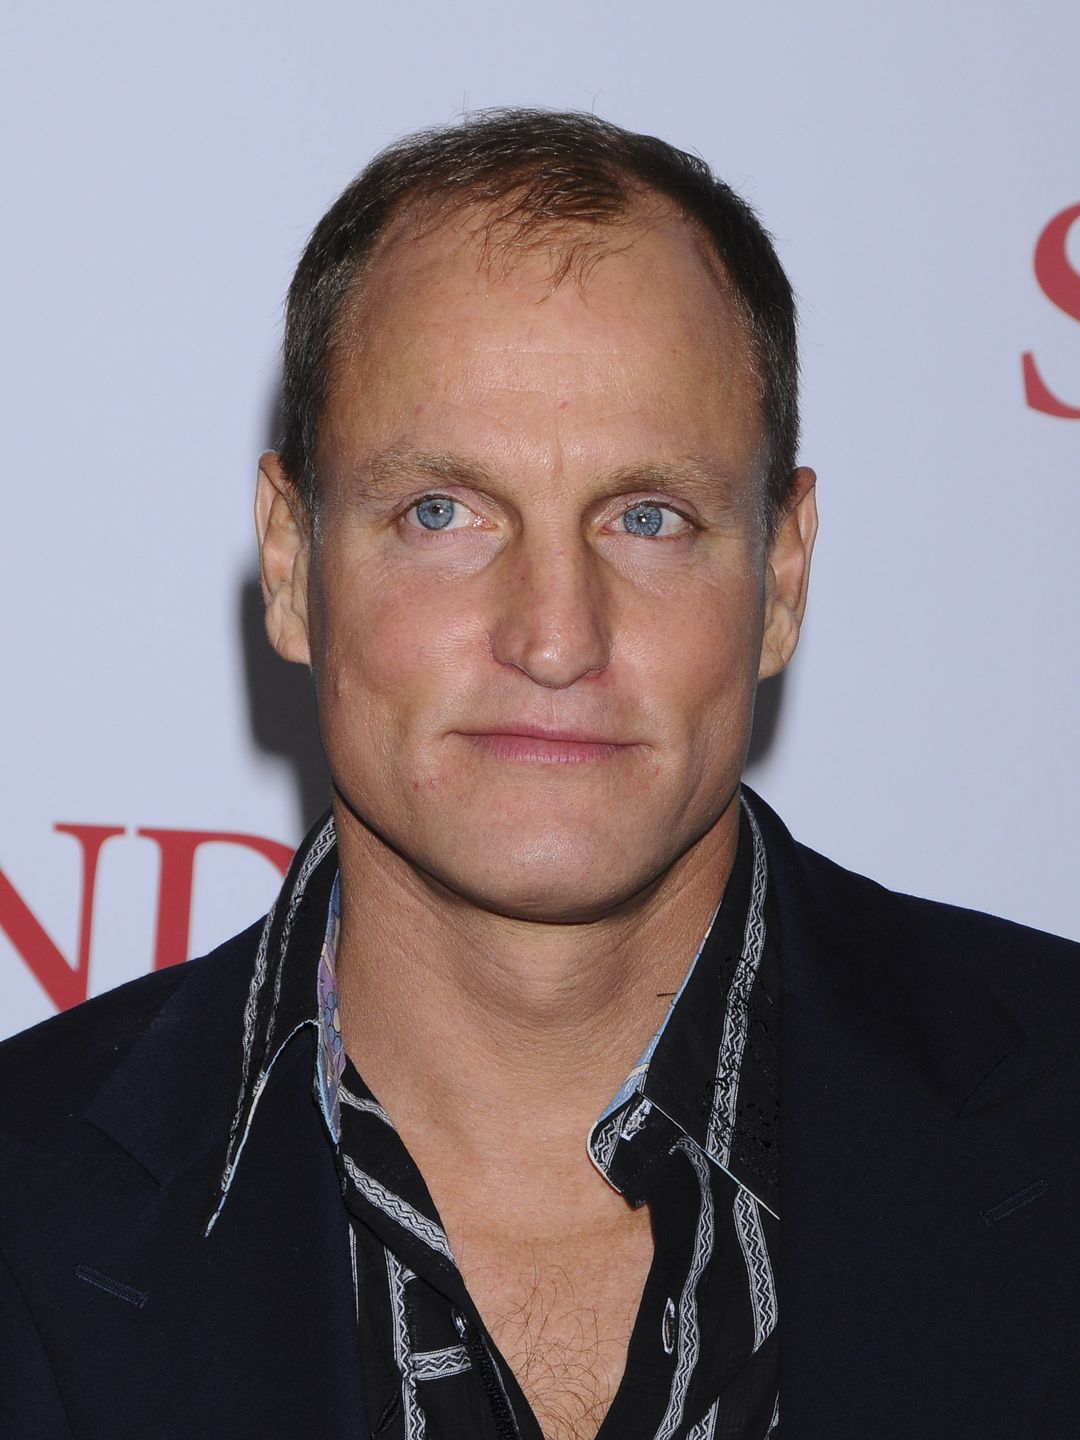 Woody Harrelson in real life